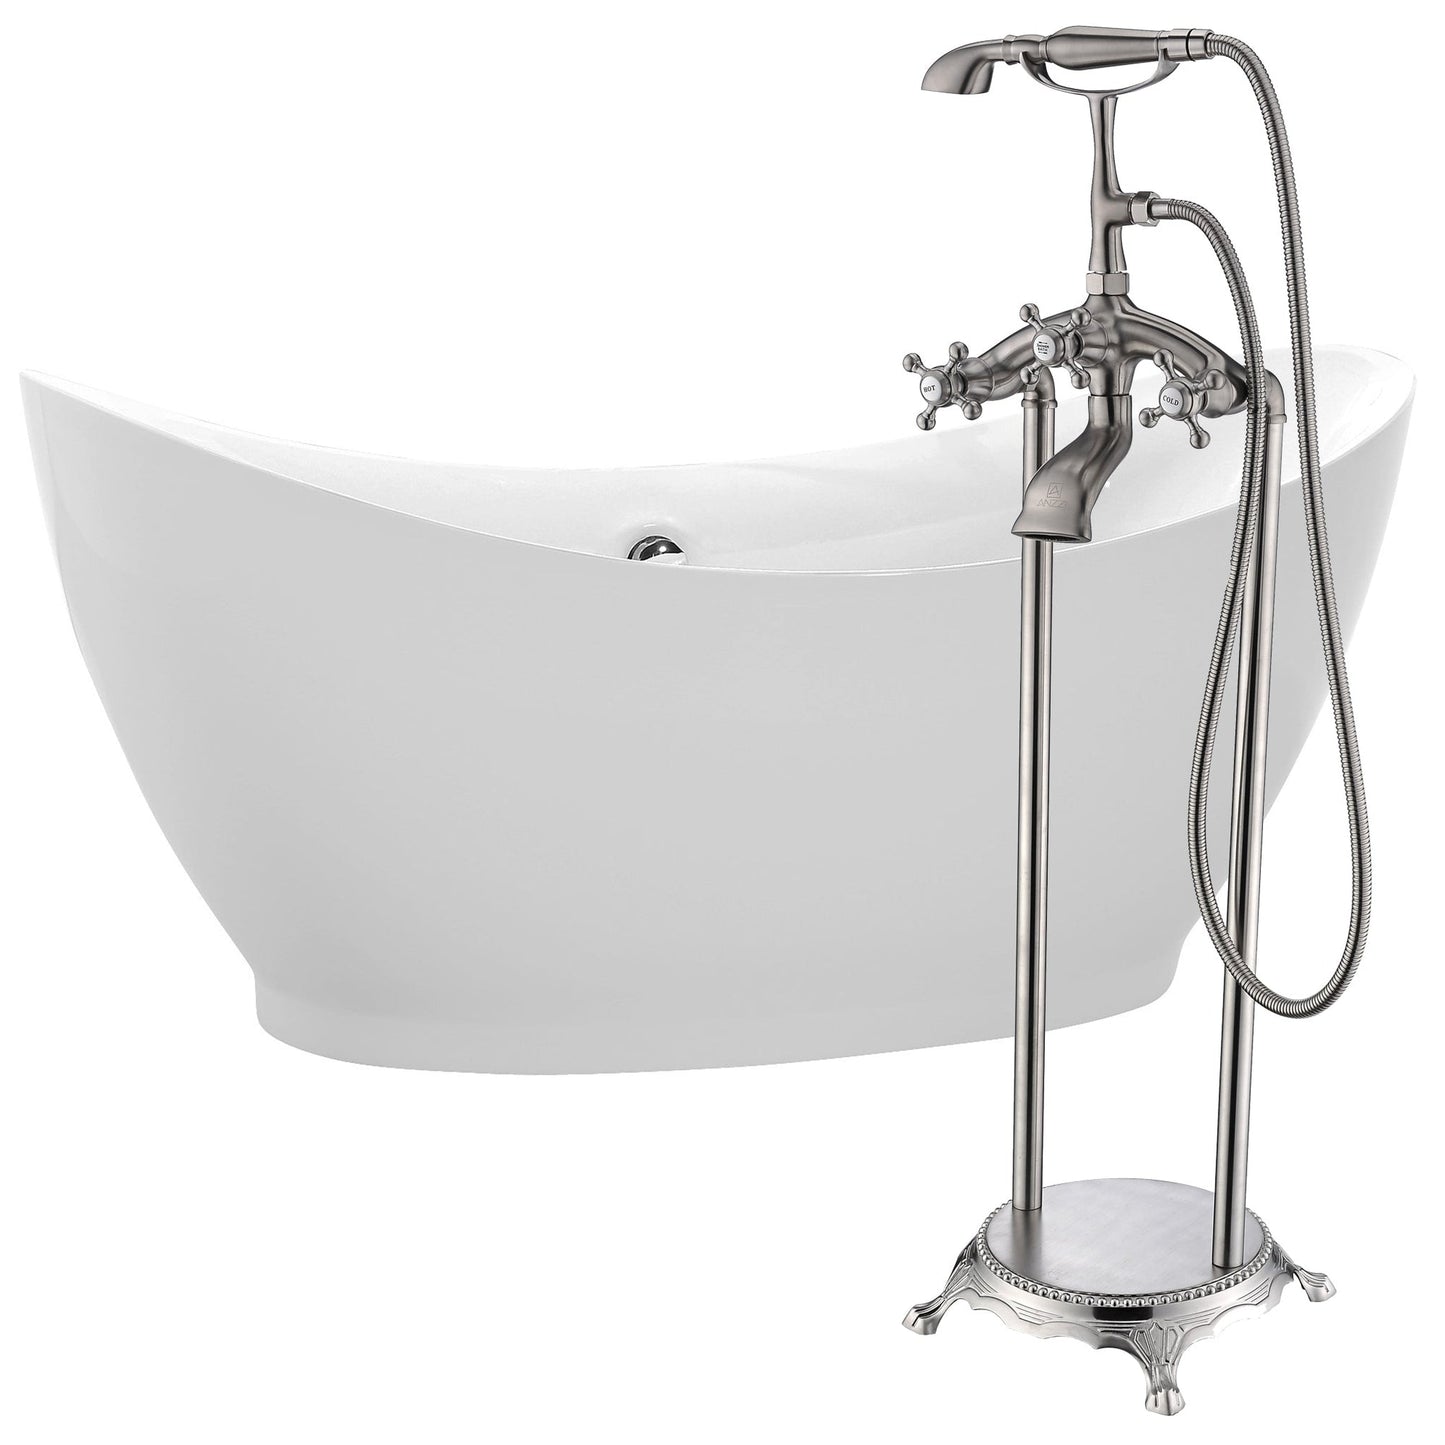 ANZZI Reginald Series 68" x 31" Glossy White Freestanding Bathtub With Built-In Overflow, Pop Up Drain and Tugela Bathtub Faucet